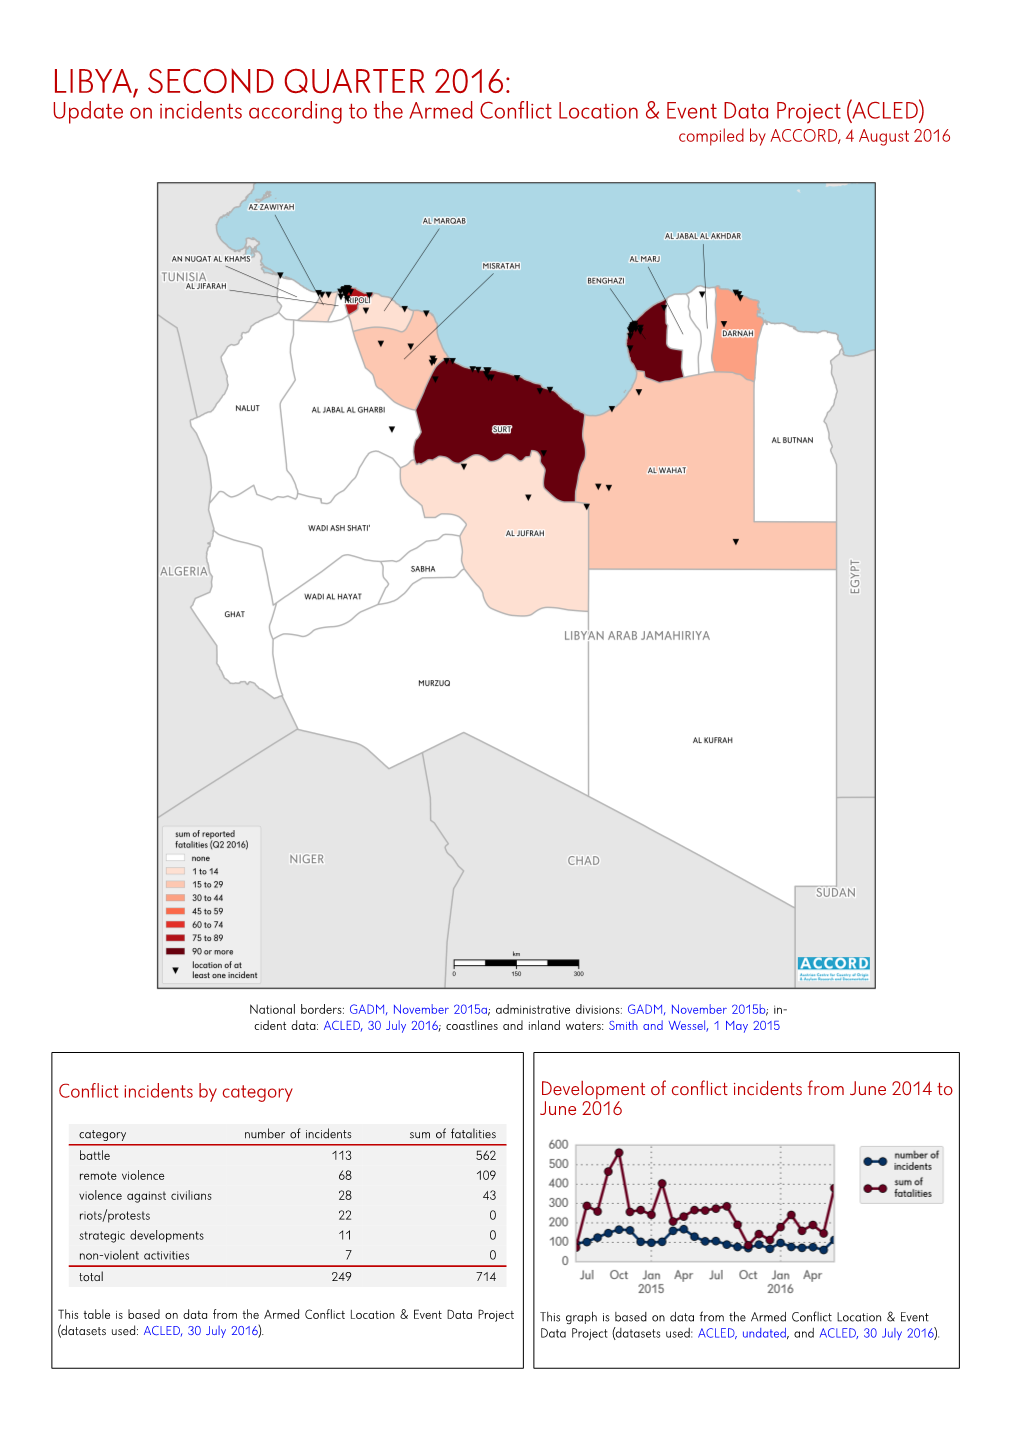 Libya, Second Quarter 2016: Update on Incidents According to the Armed Conflict Location & Event Data Project